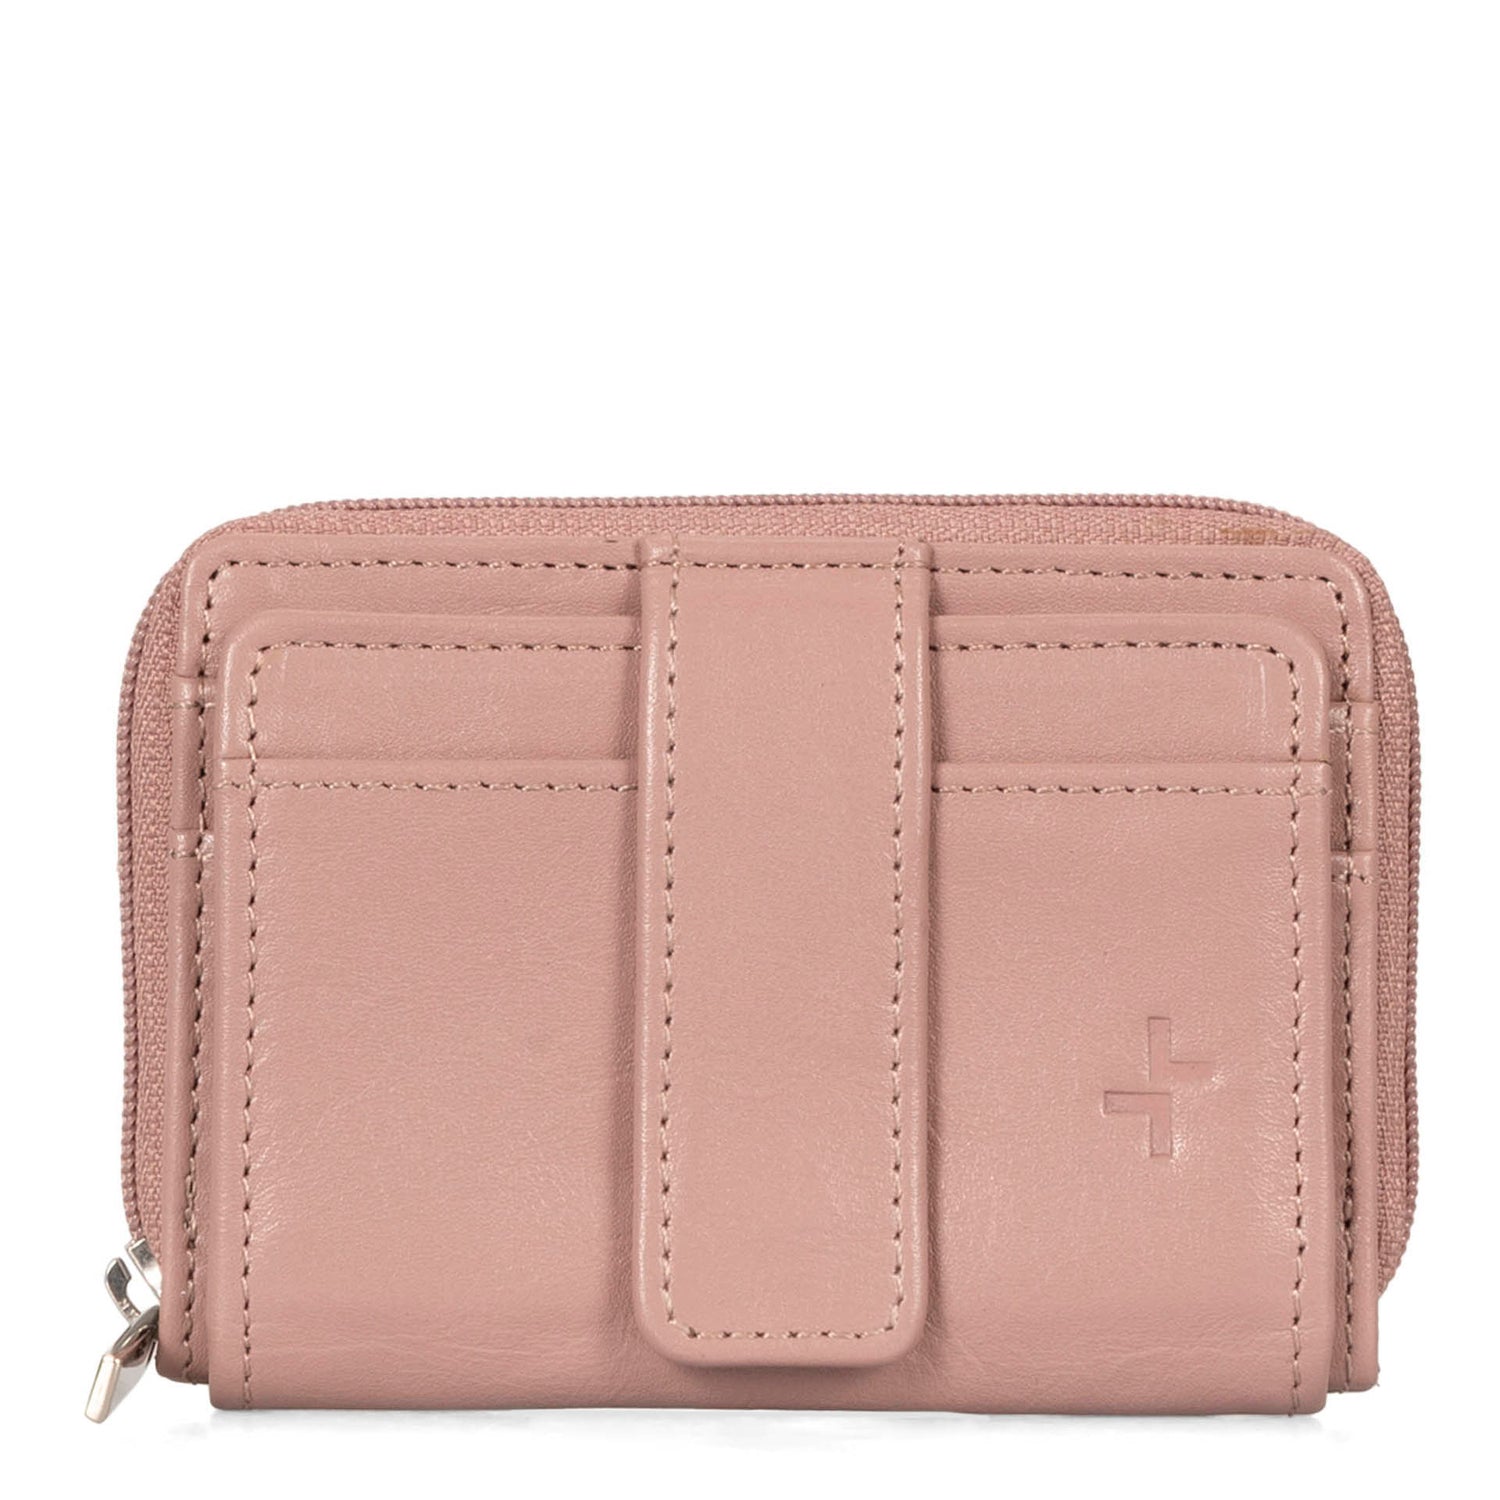 Front side of a pink card holder called basics by tracker, showing its 2 front card slots and closure strap.